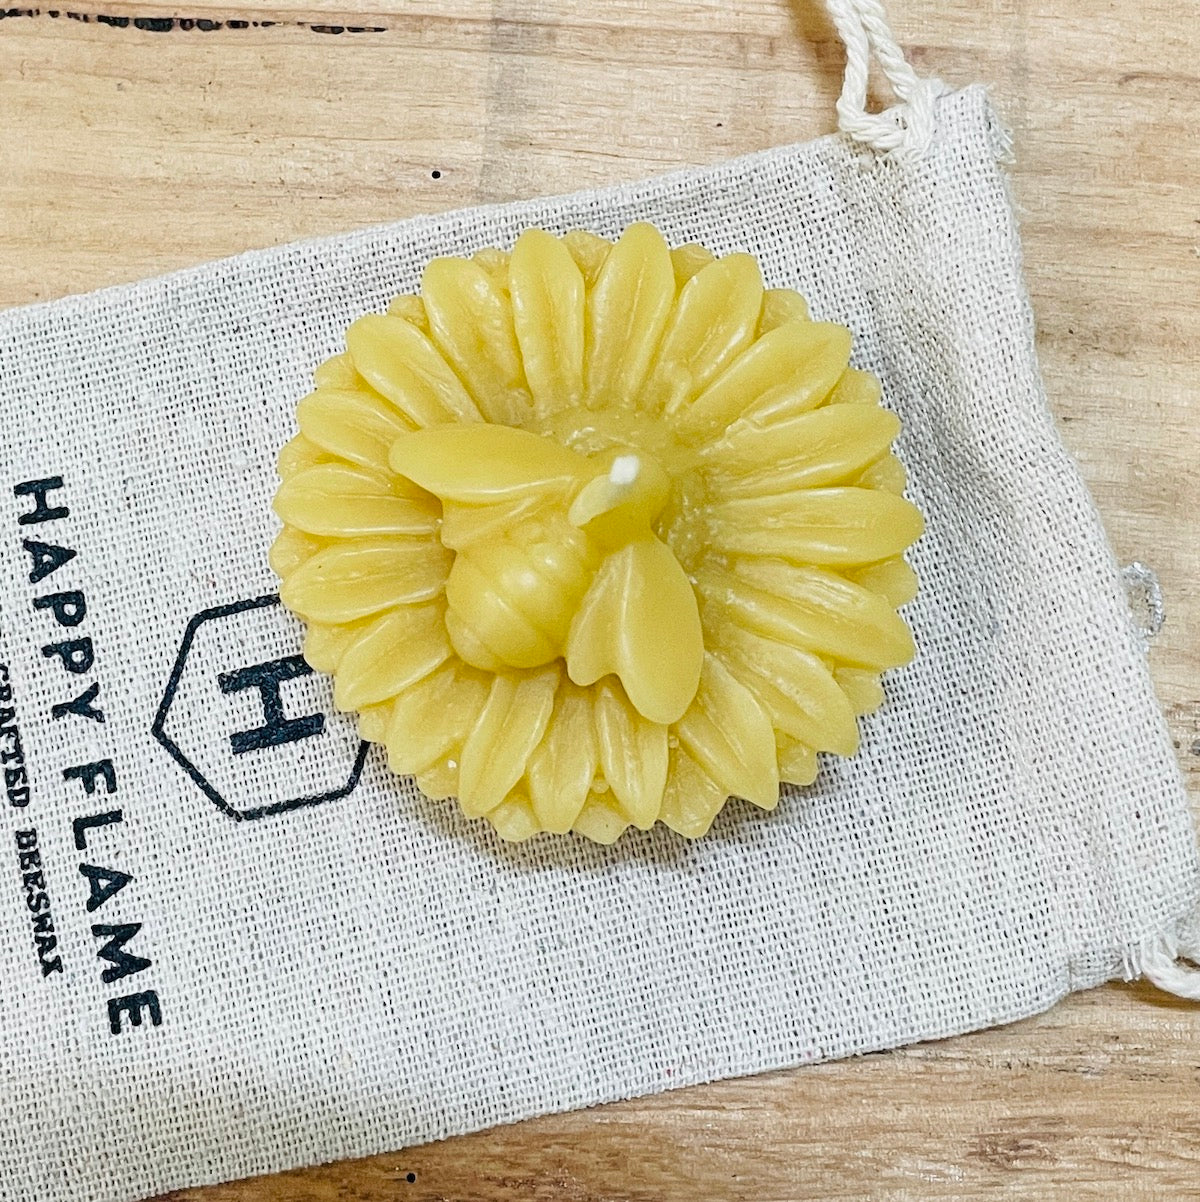 Honeybee on a flower - a floating beeswax candle Decorative Happy Flame 